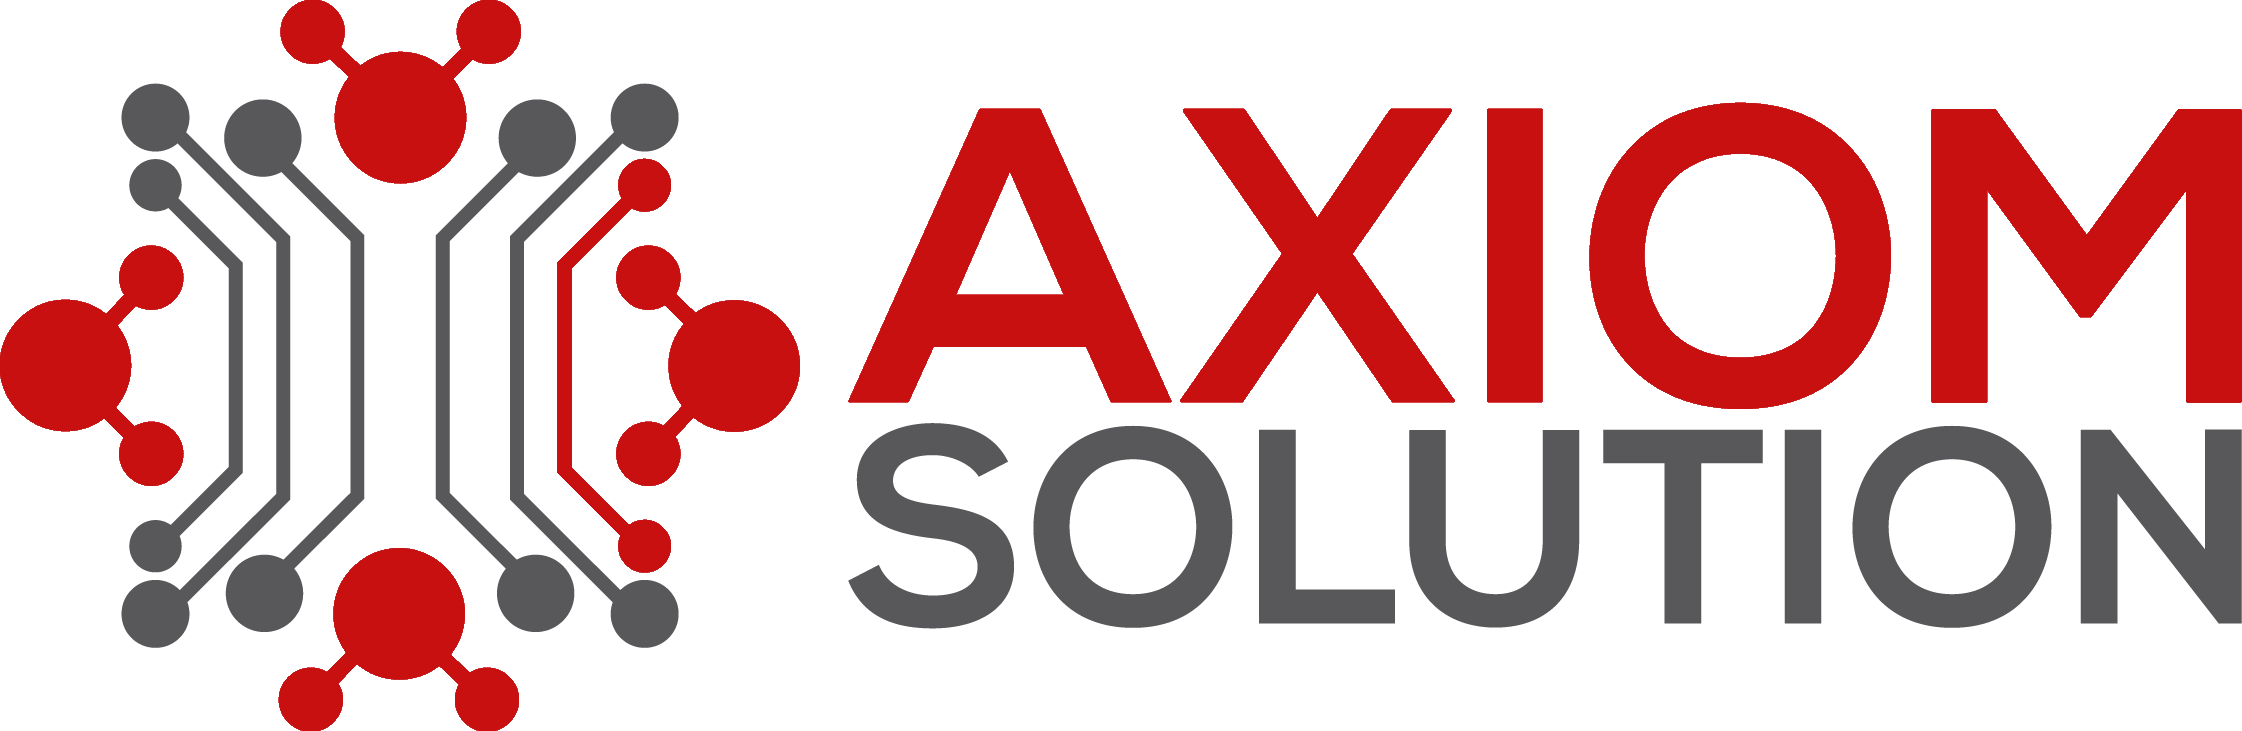 Axiom Solution Group – Powering Your Business Needs.